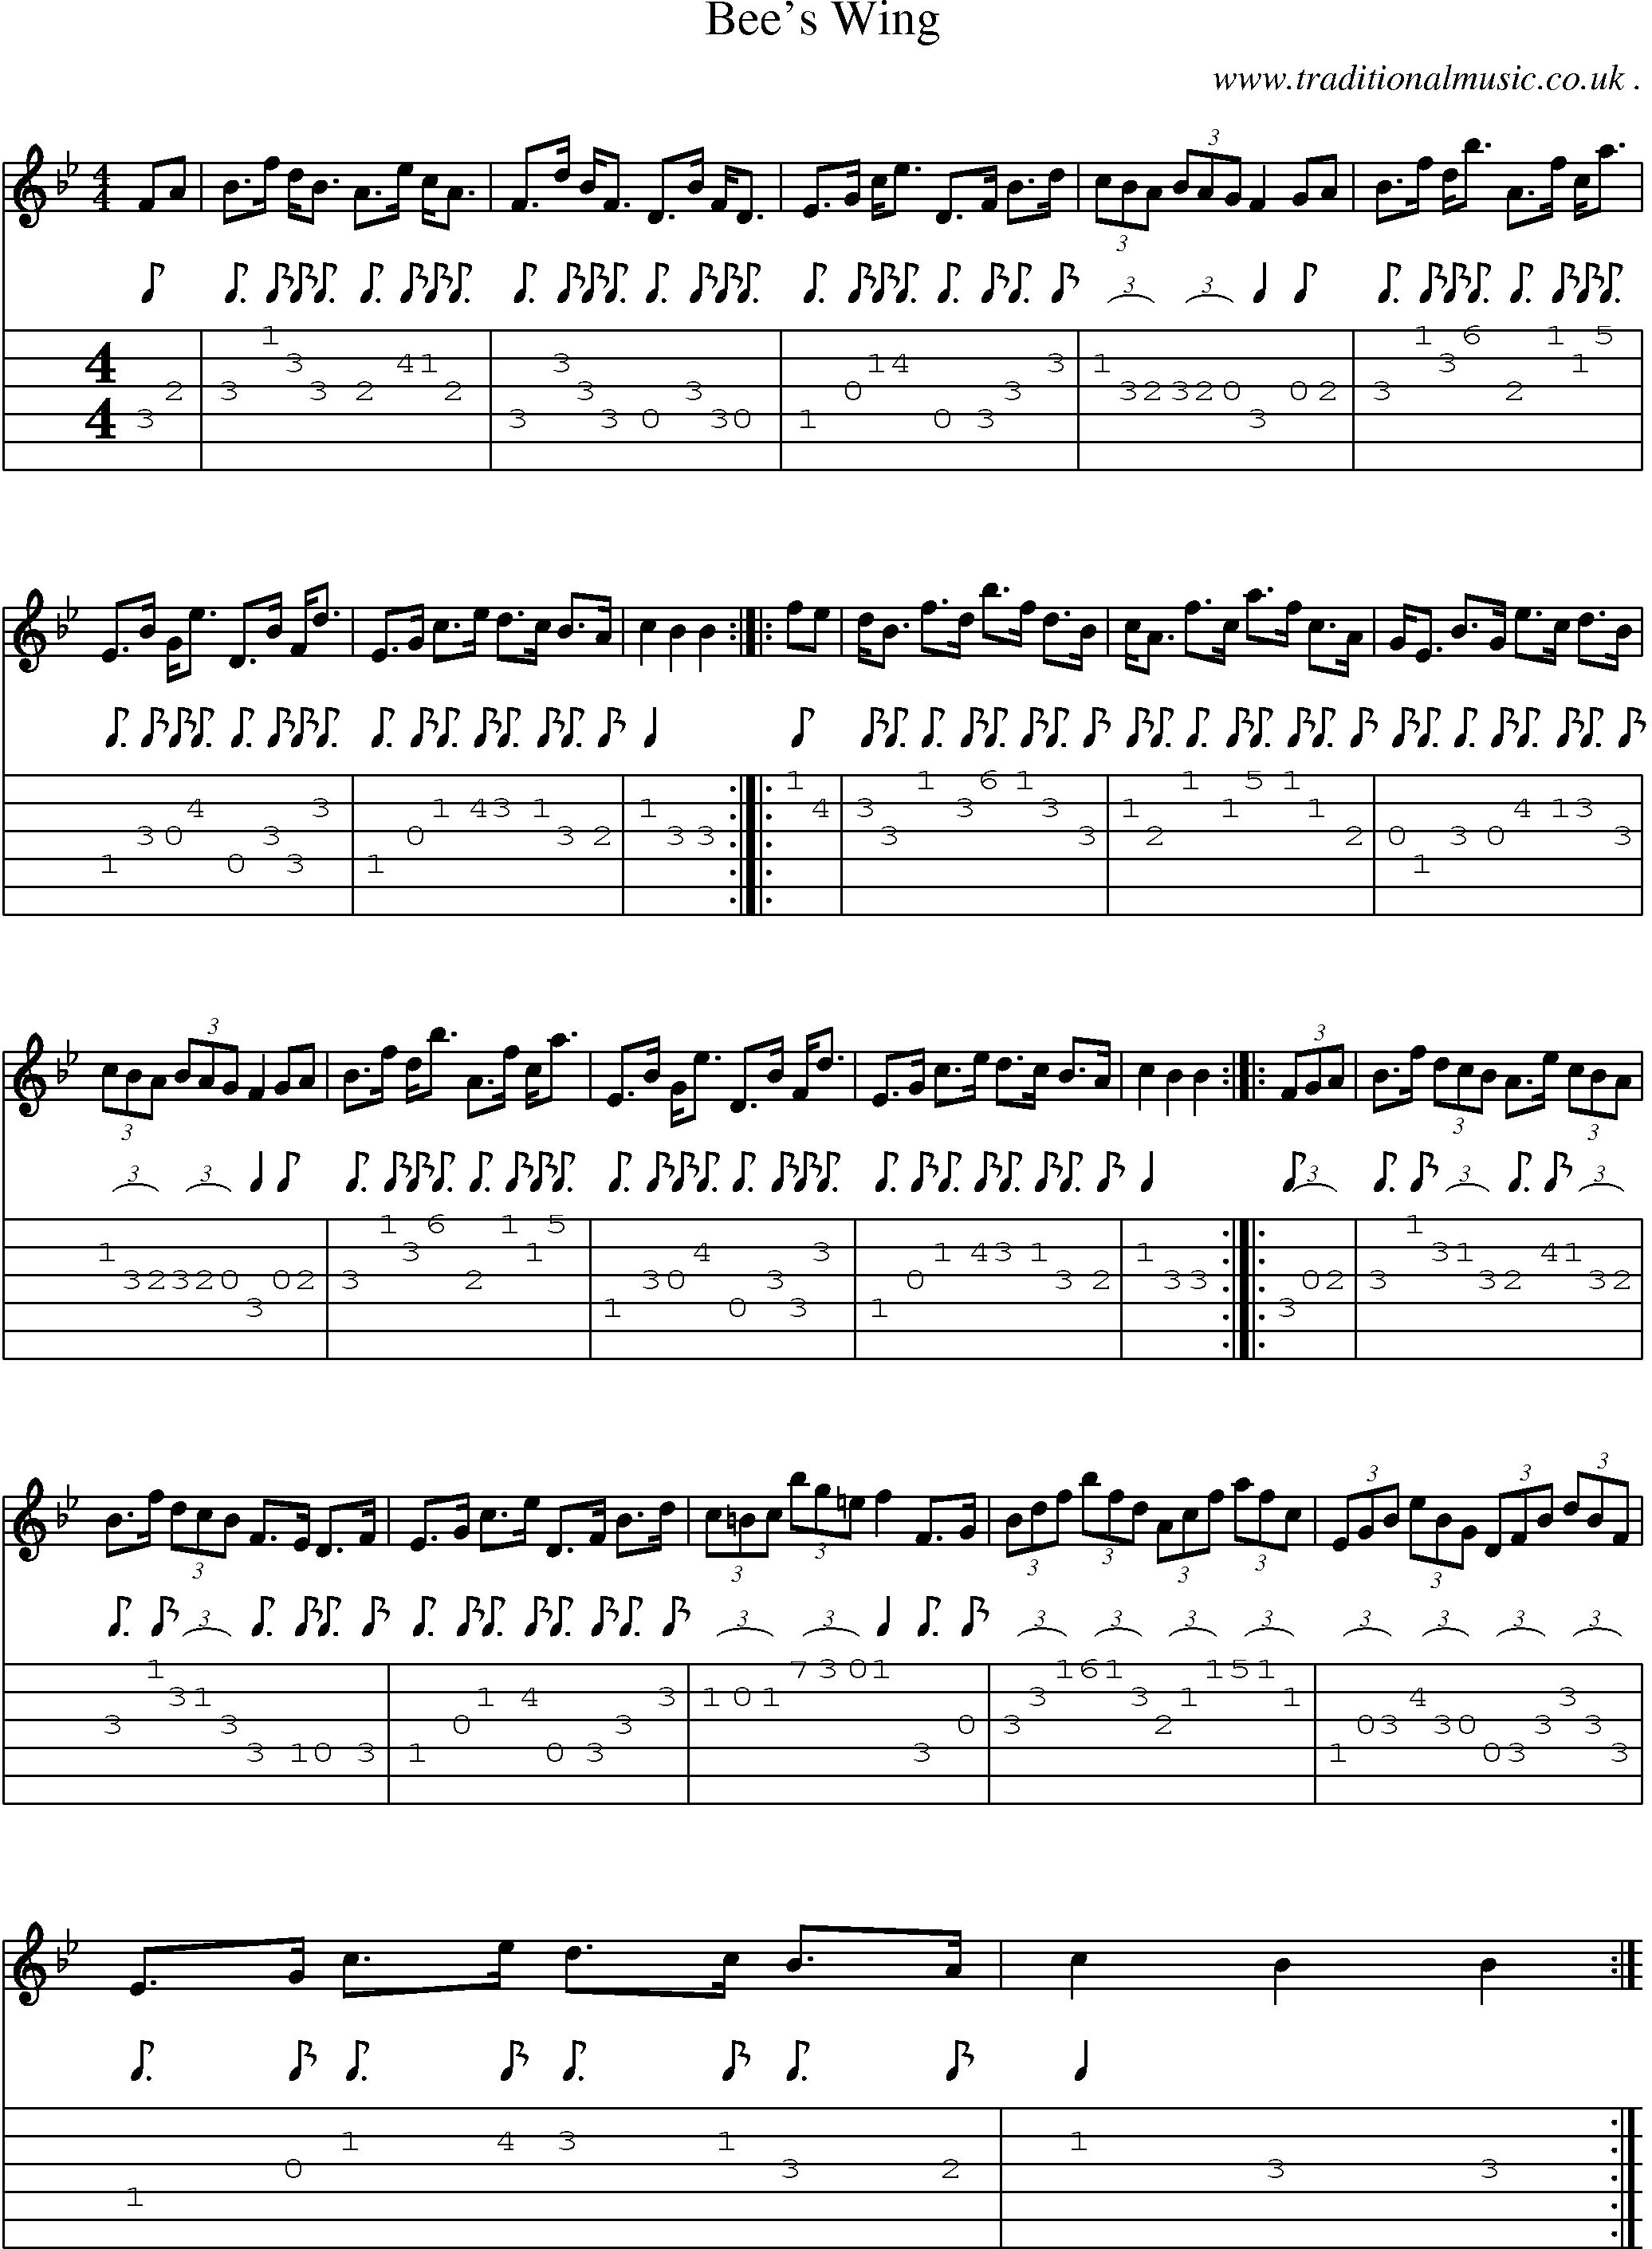 Sheet-Music and Guitar Tabs for Bees Wing